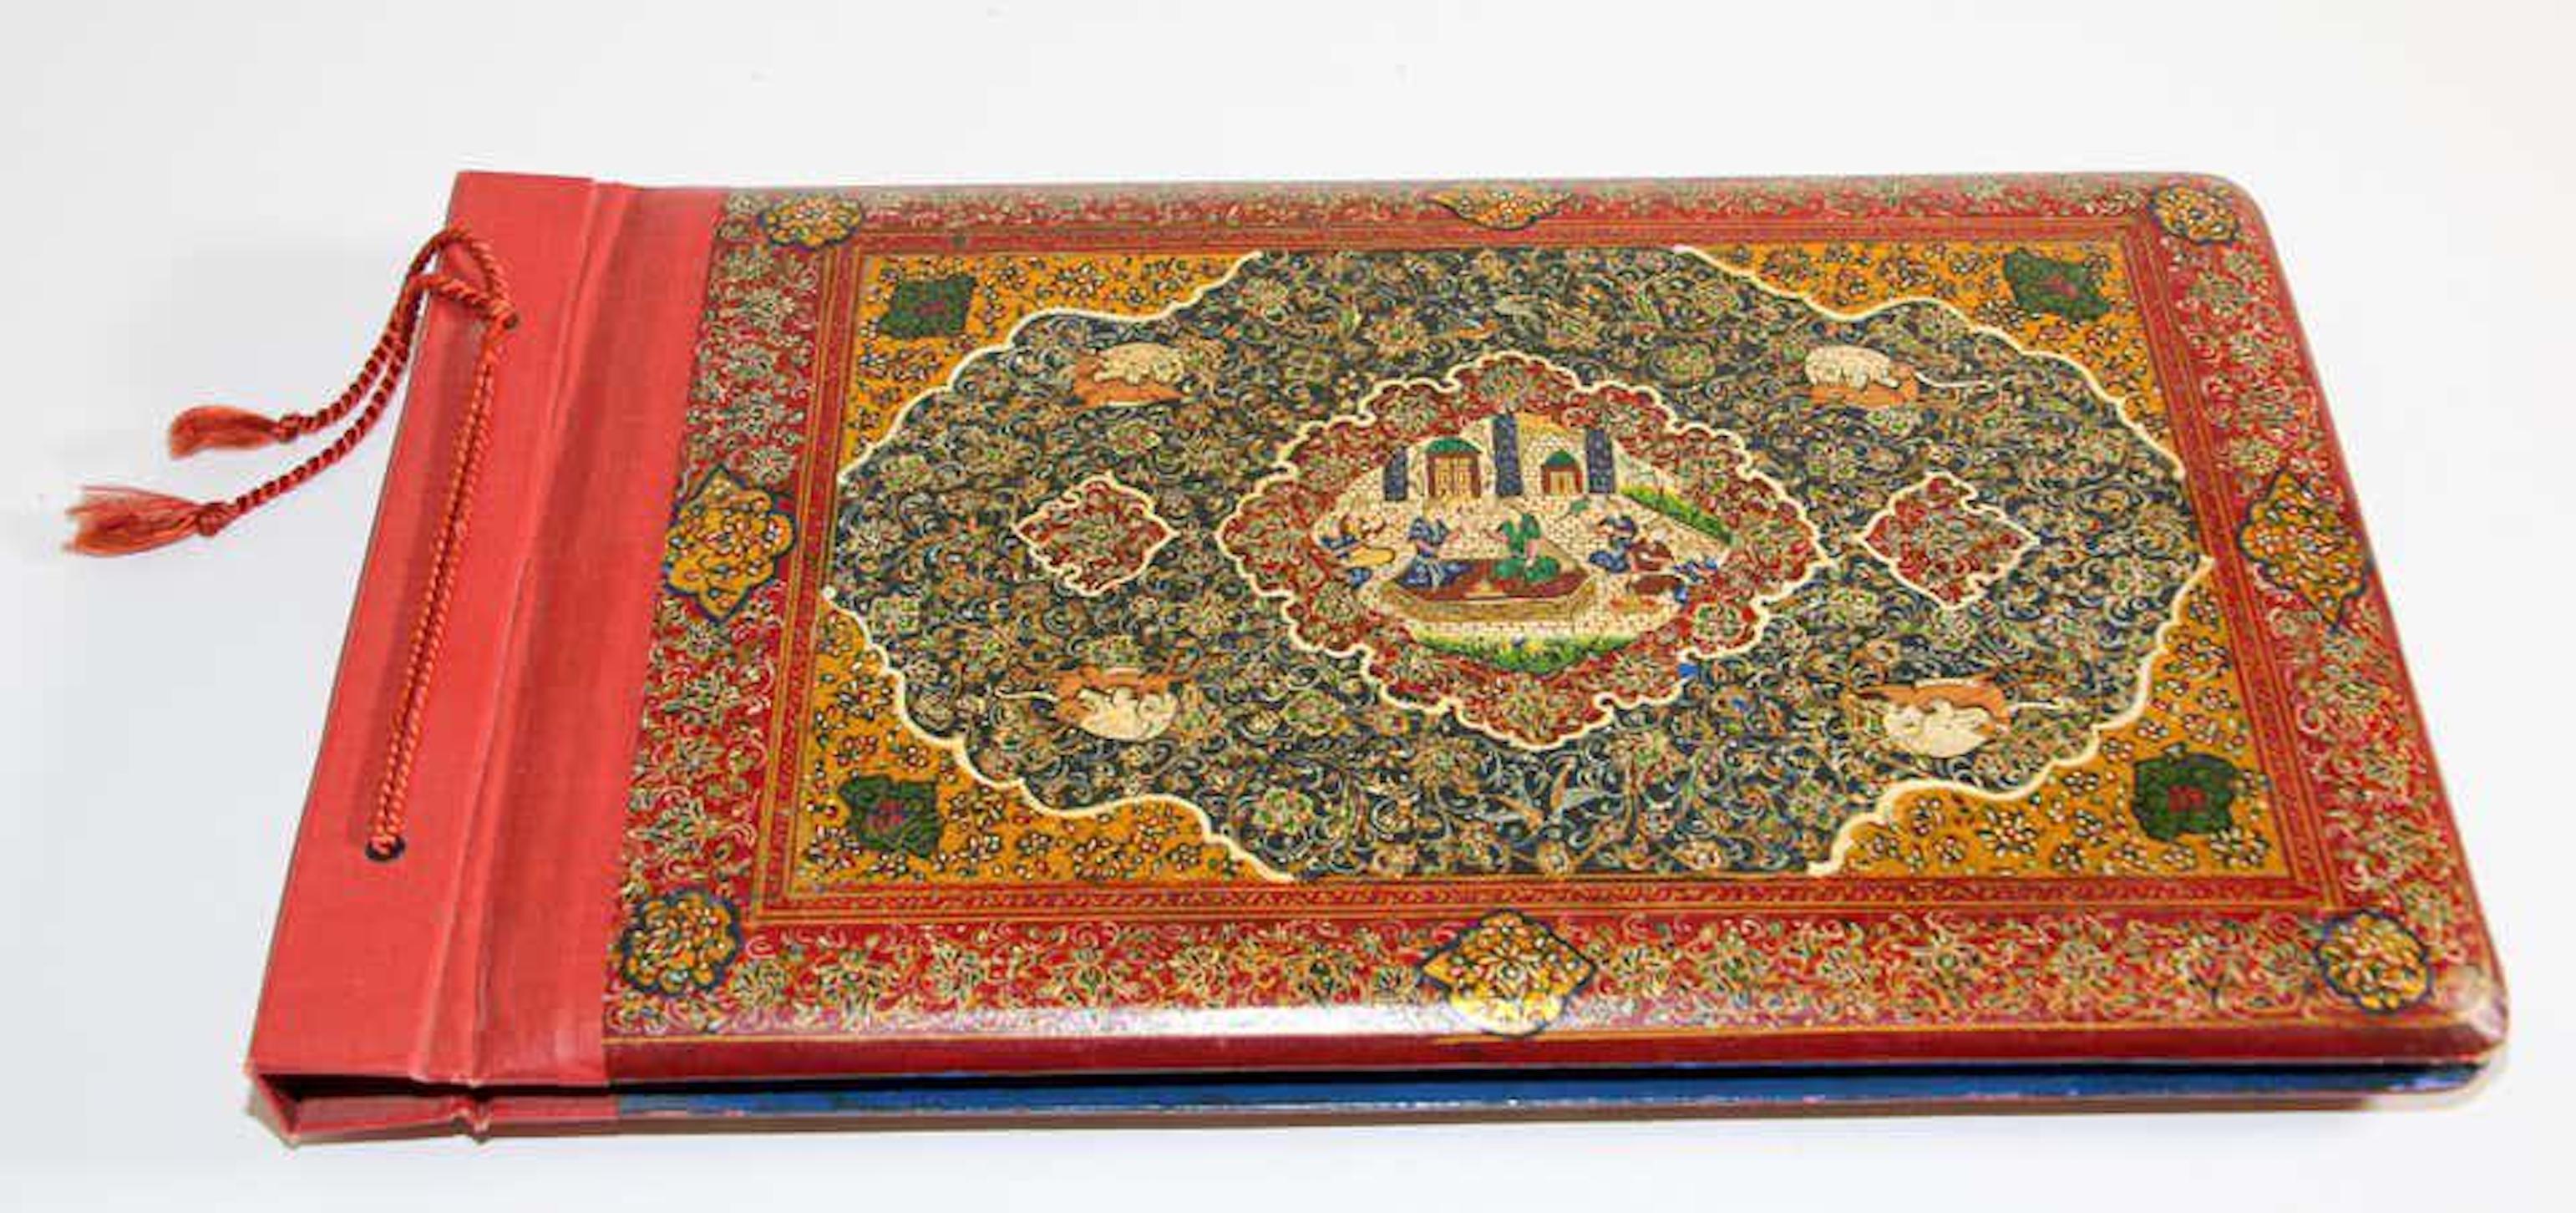 Hand Painted Middle Eastern Moorish Style Photo Album, 19th Century For Sale 8